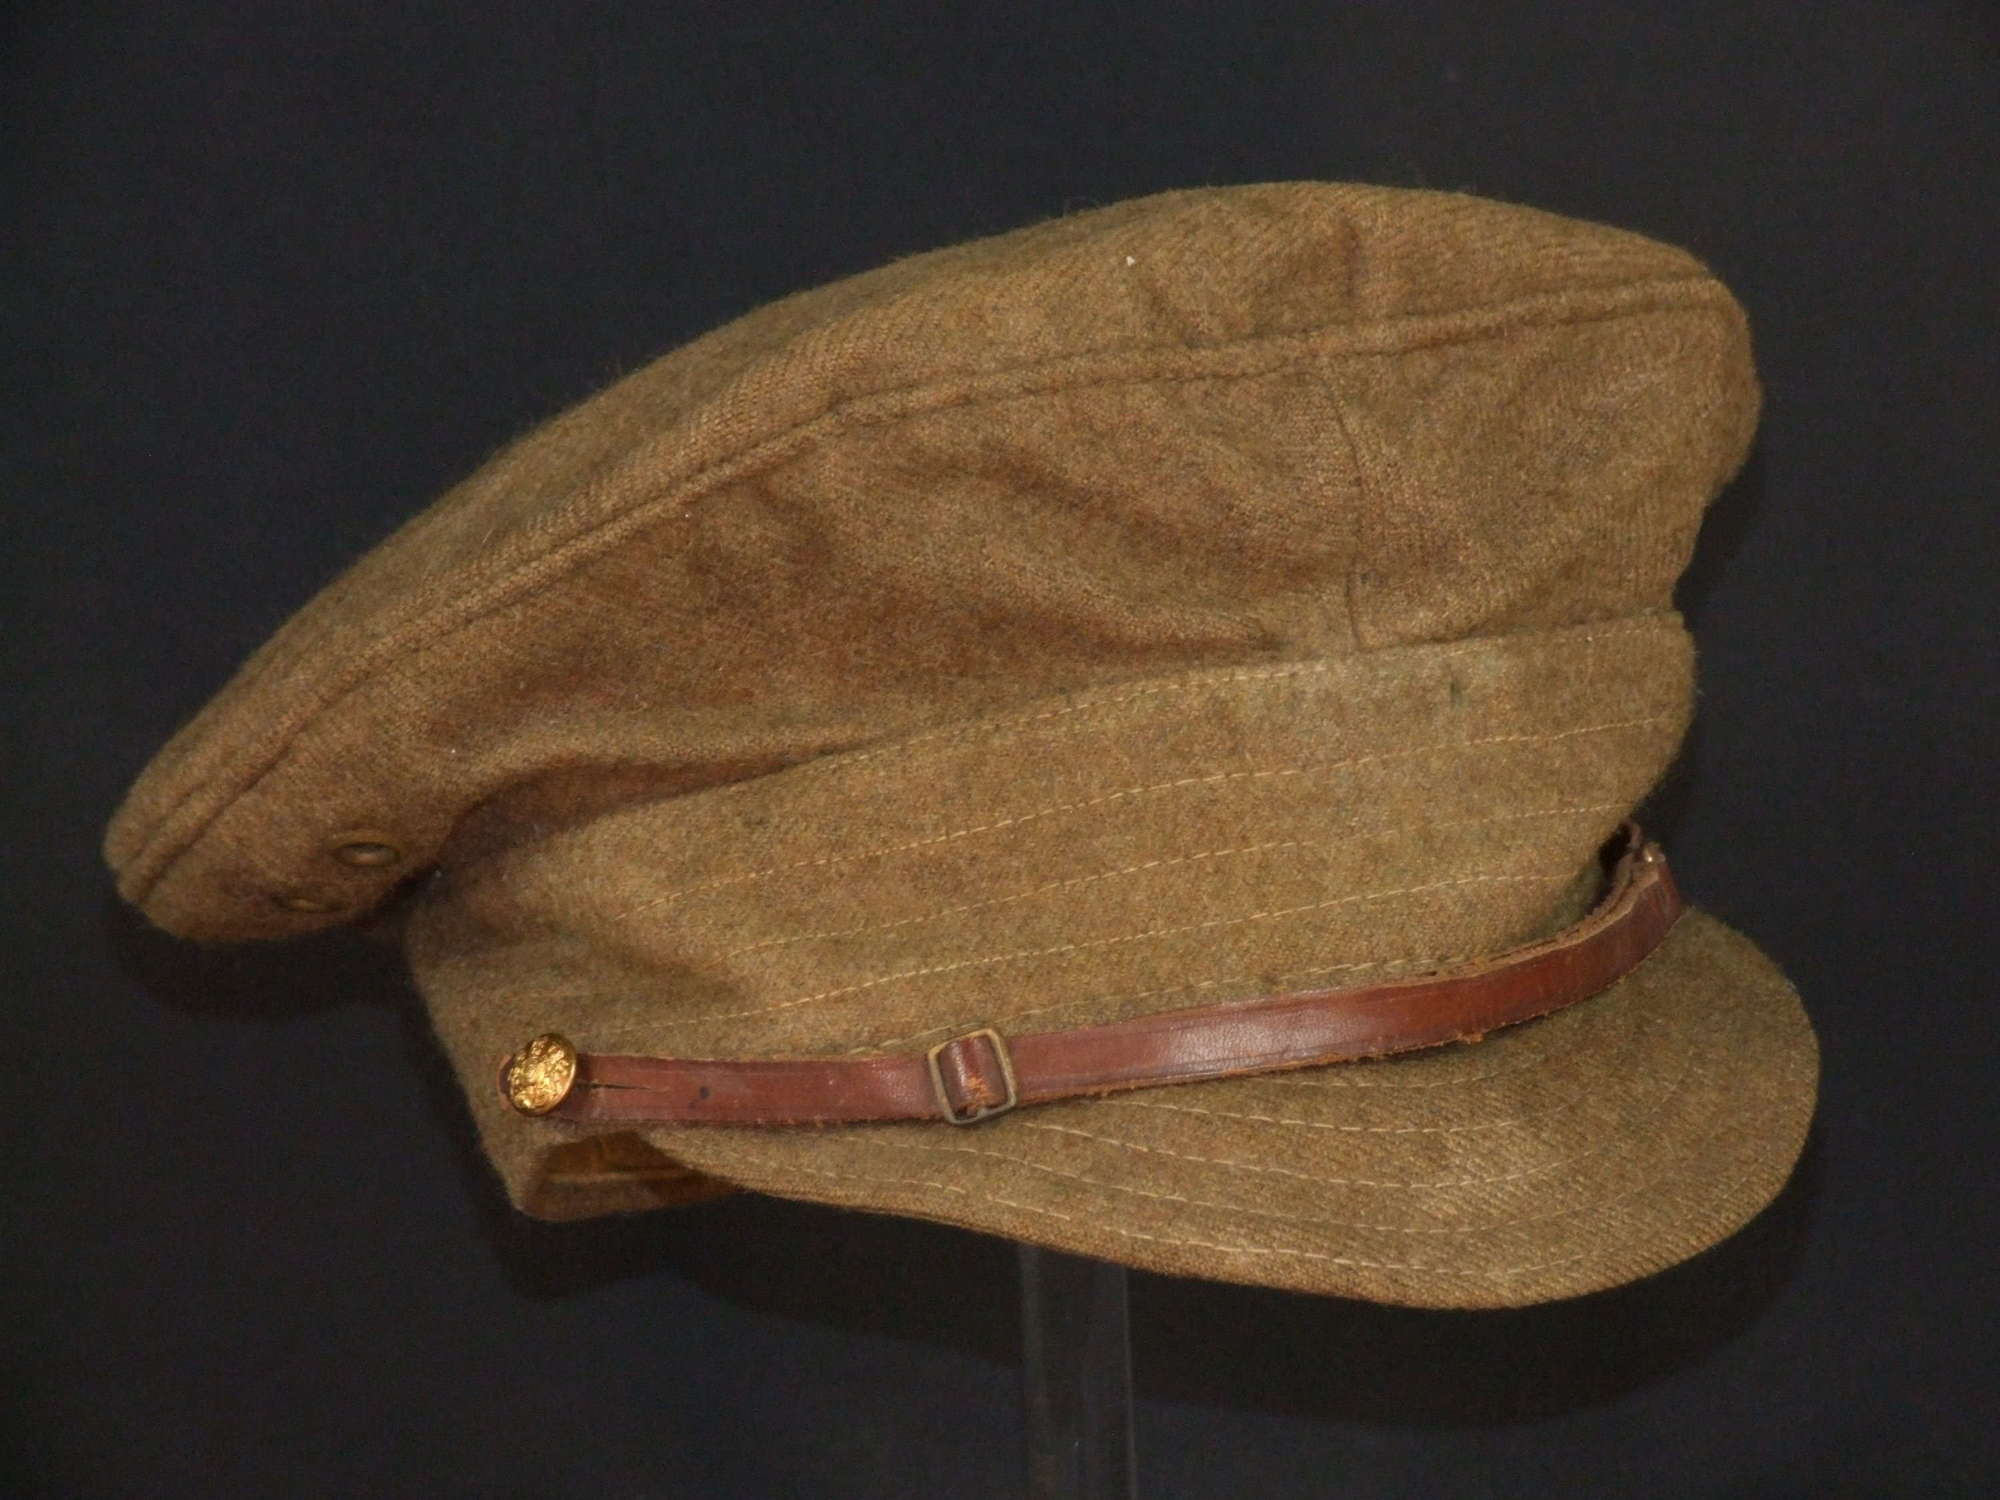 WW1 British Woolen Trench Cap for Enlisted Ranks. Size 7 1/8